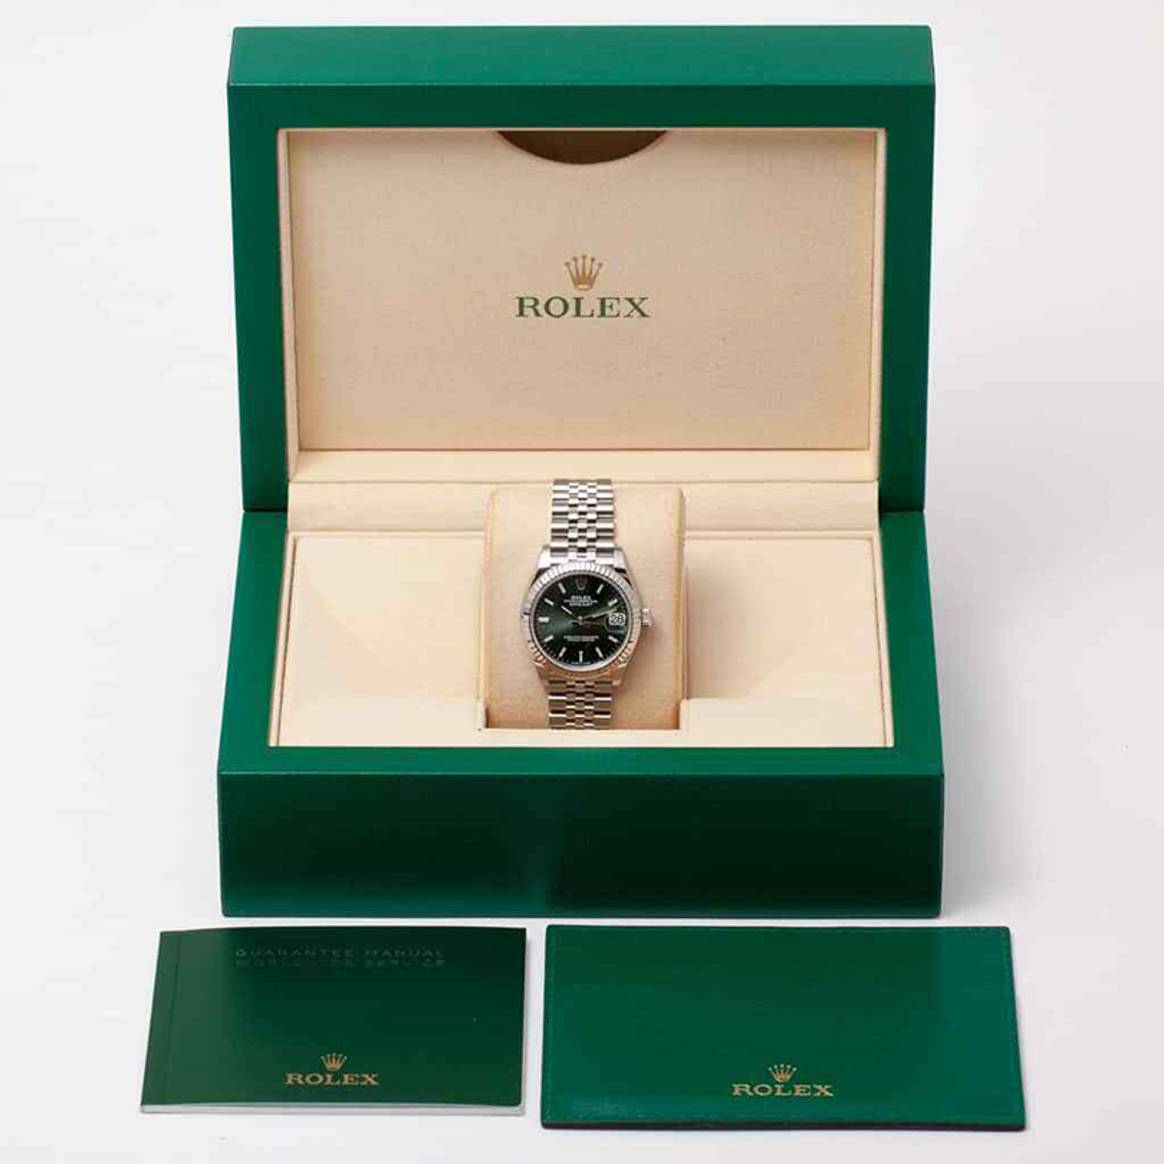 Gift a luxury watch this Christmas with eBay